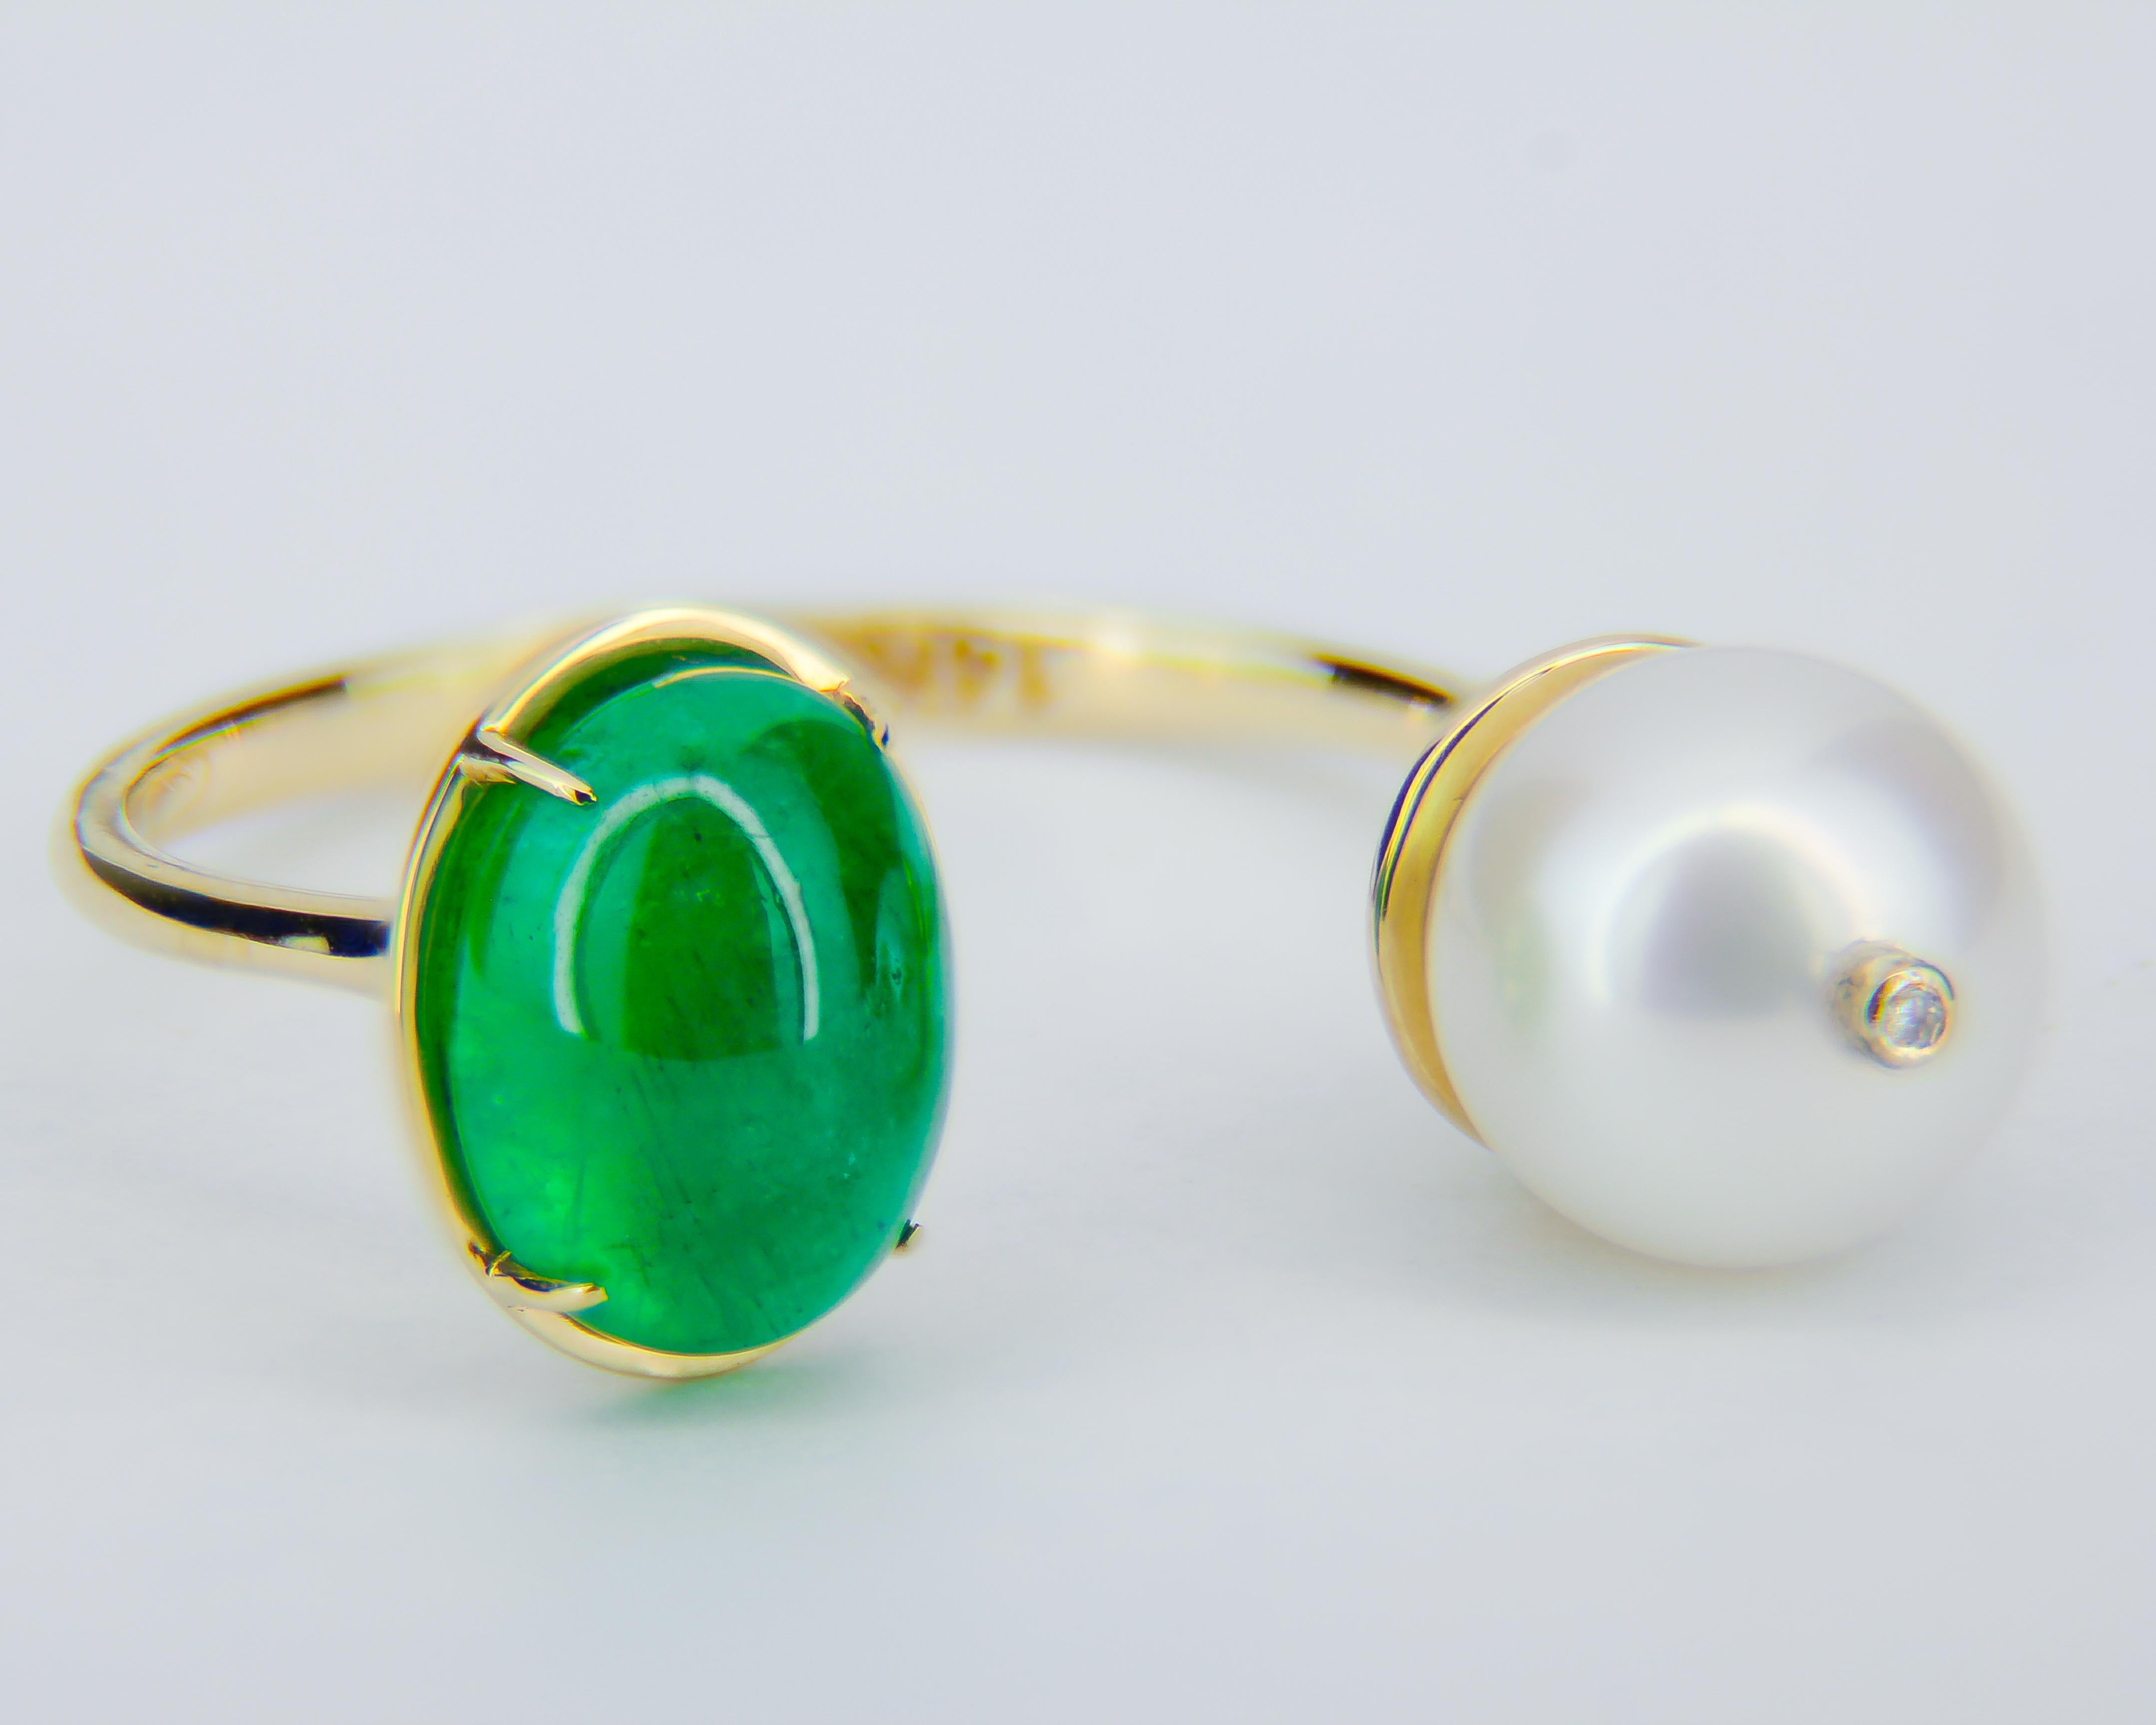 For Sale:  Emerald and Pearl 14k gold ring. Adjustable emerald ring 4